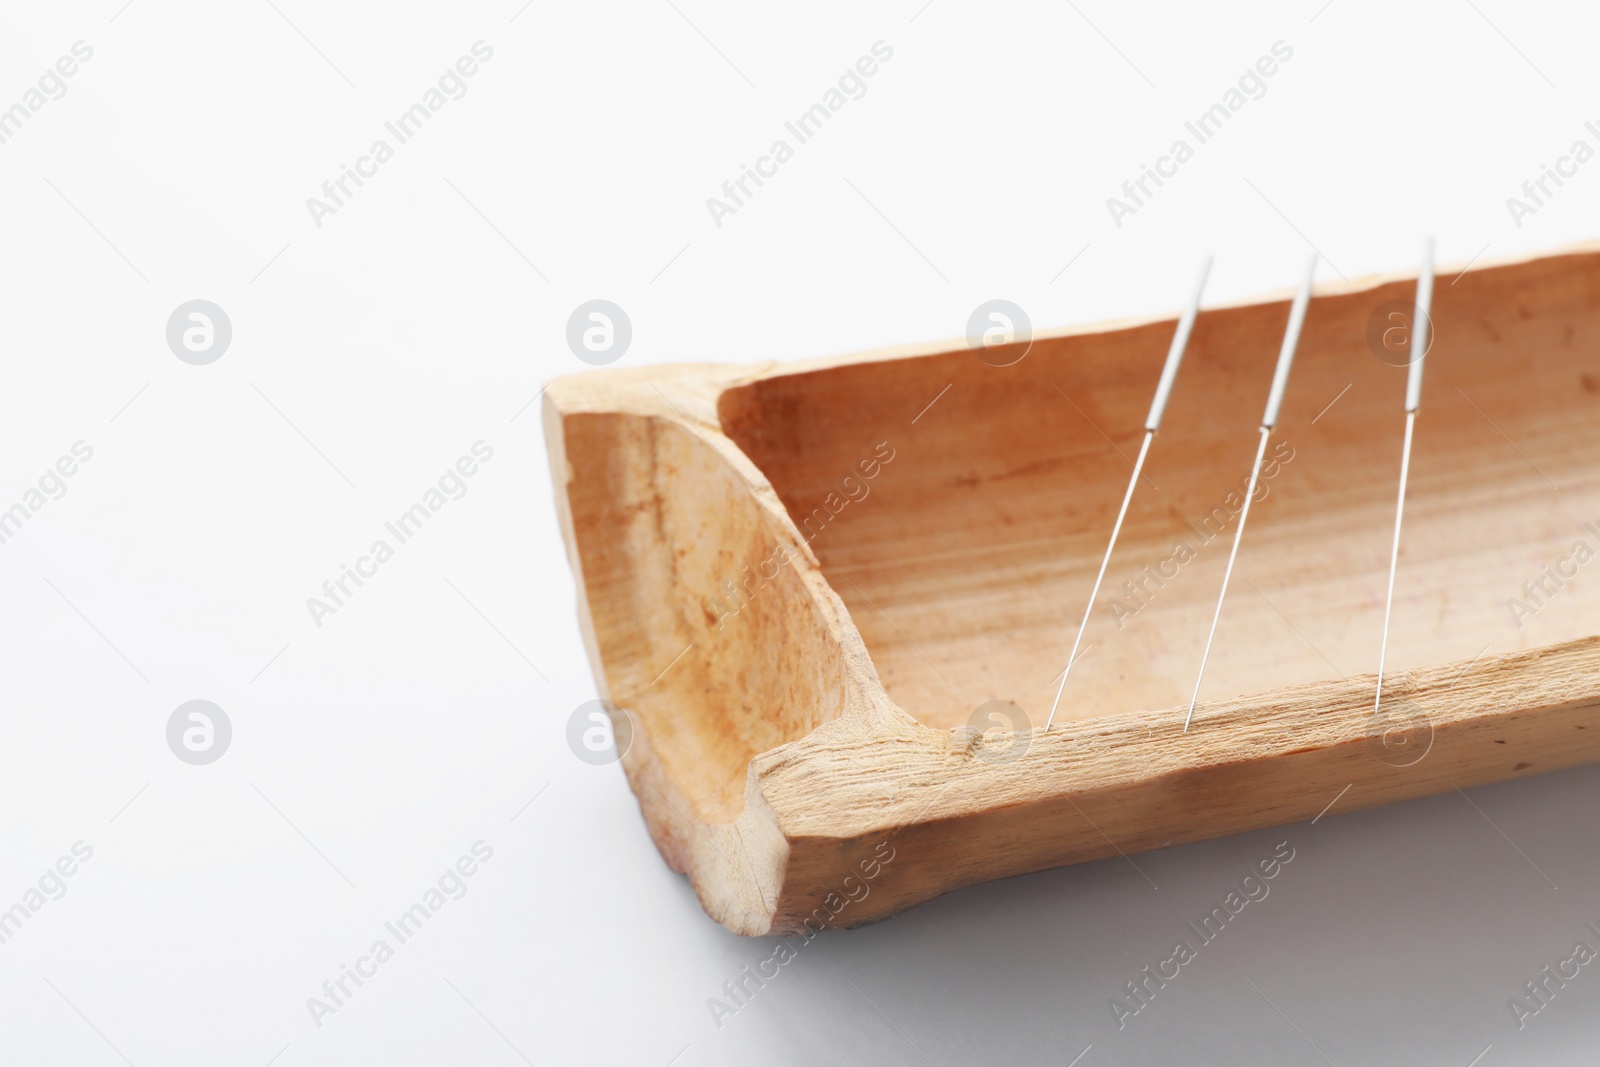 Photo of Bamboo stick with needles for acupuncture on white background